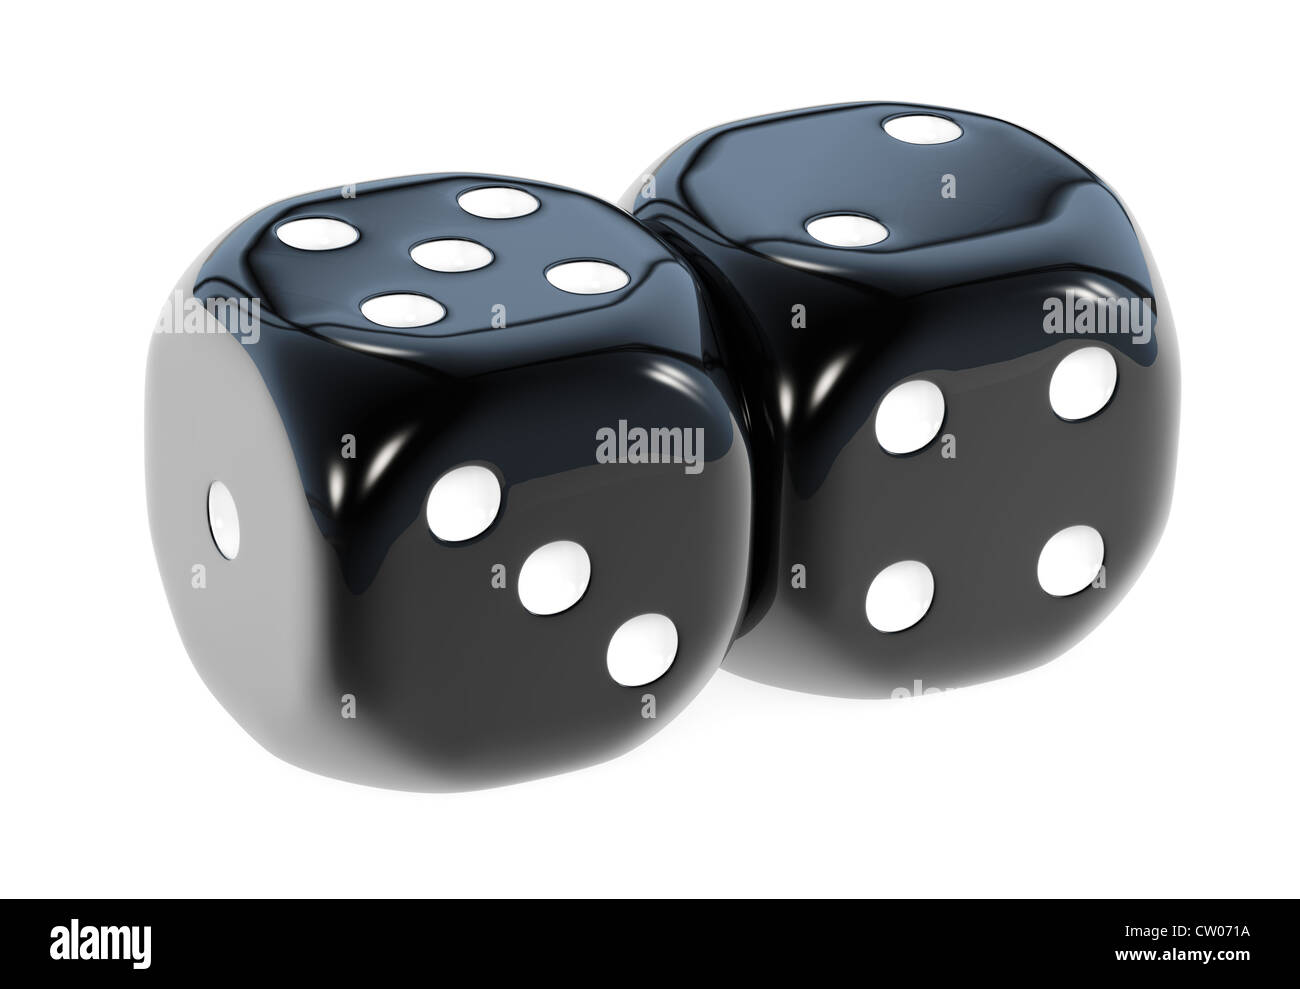 Pair of a black dice on white Stock Photo